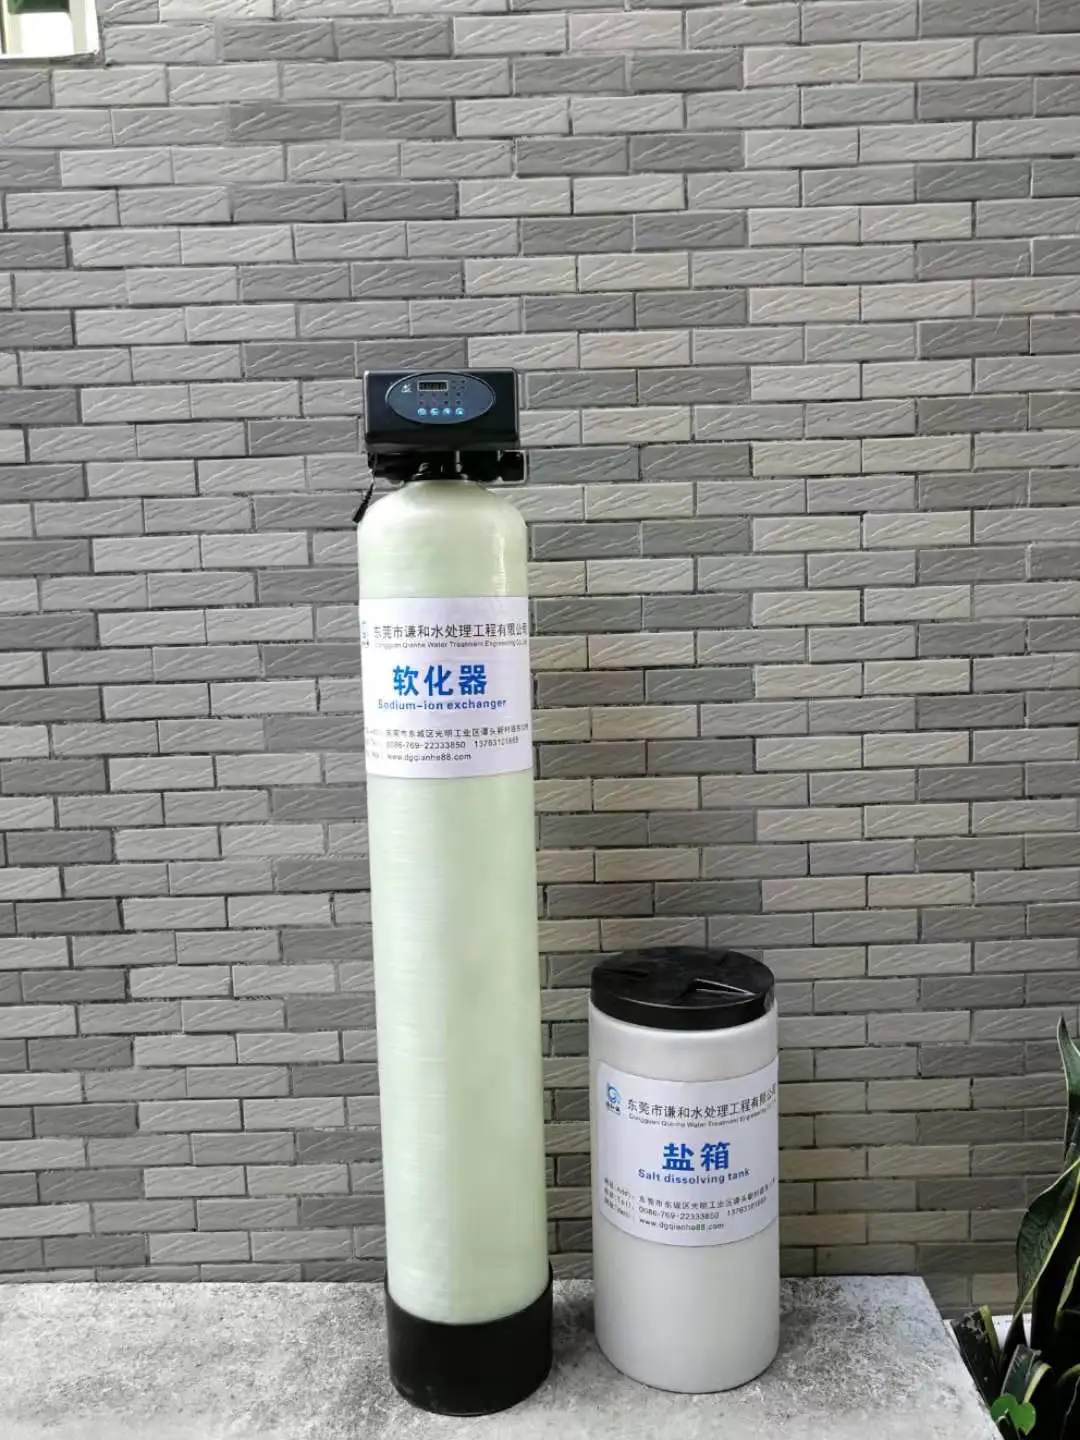 
absorb calcium magnesium ions automatic single stage home water softener system water treatment machines 